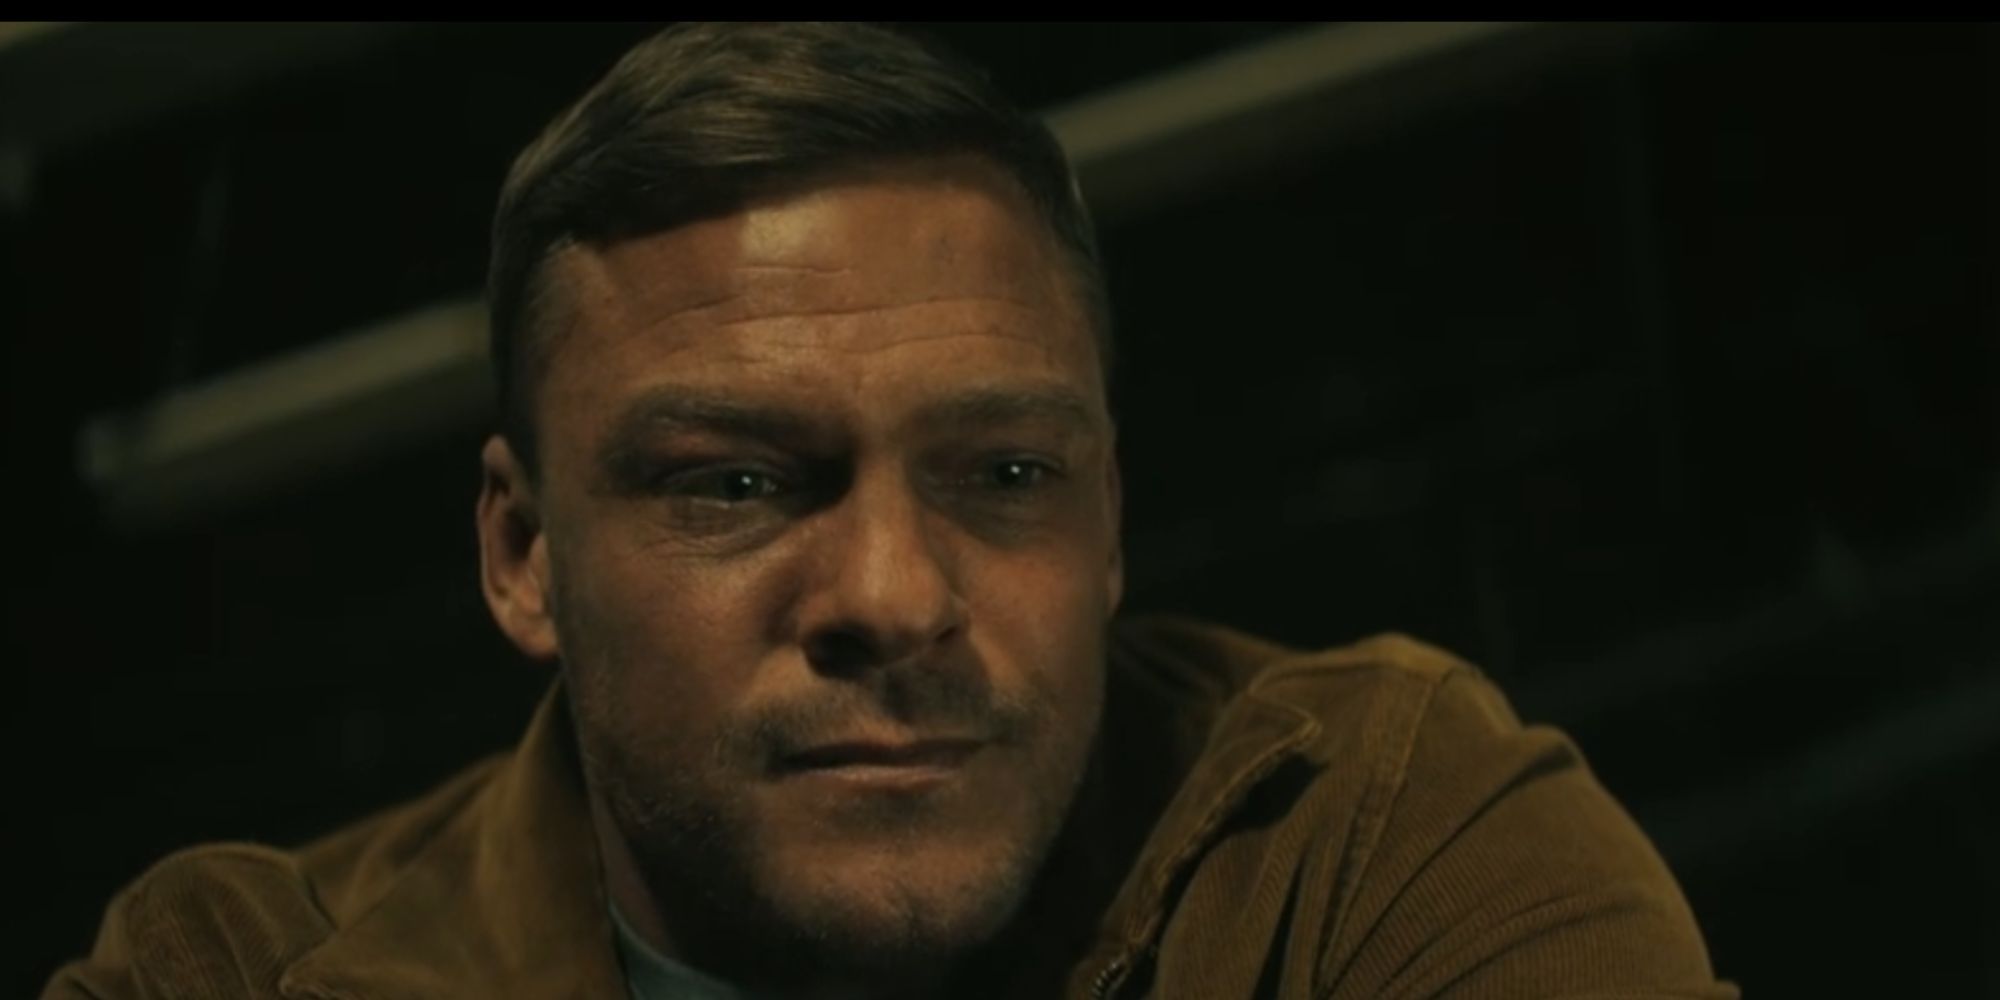 Alan Ritchson as Reacher looking concerned